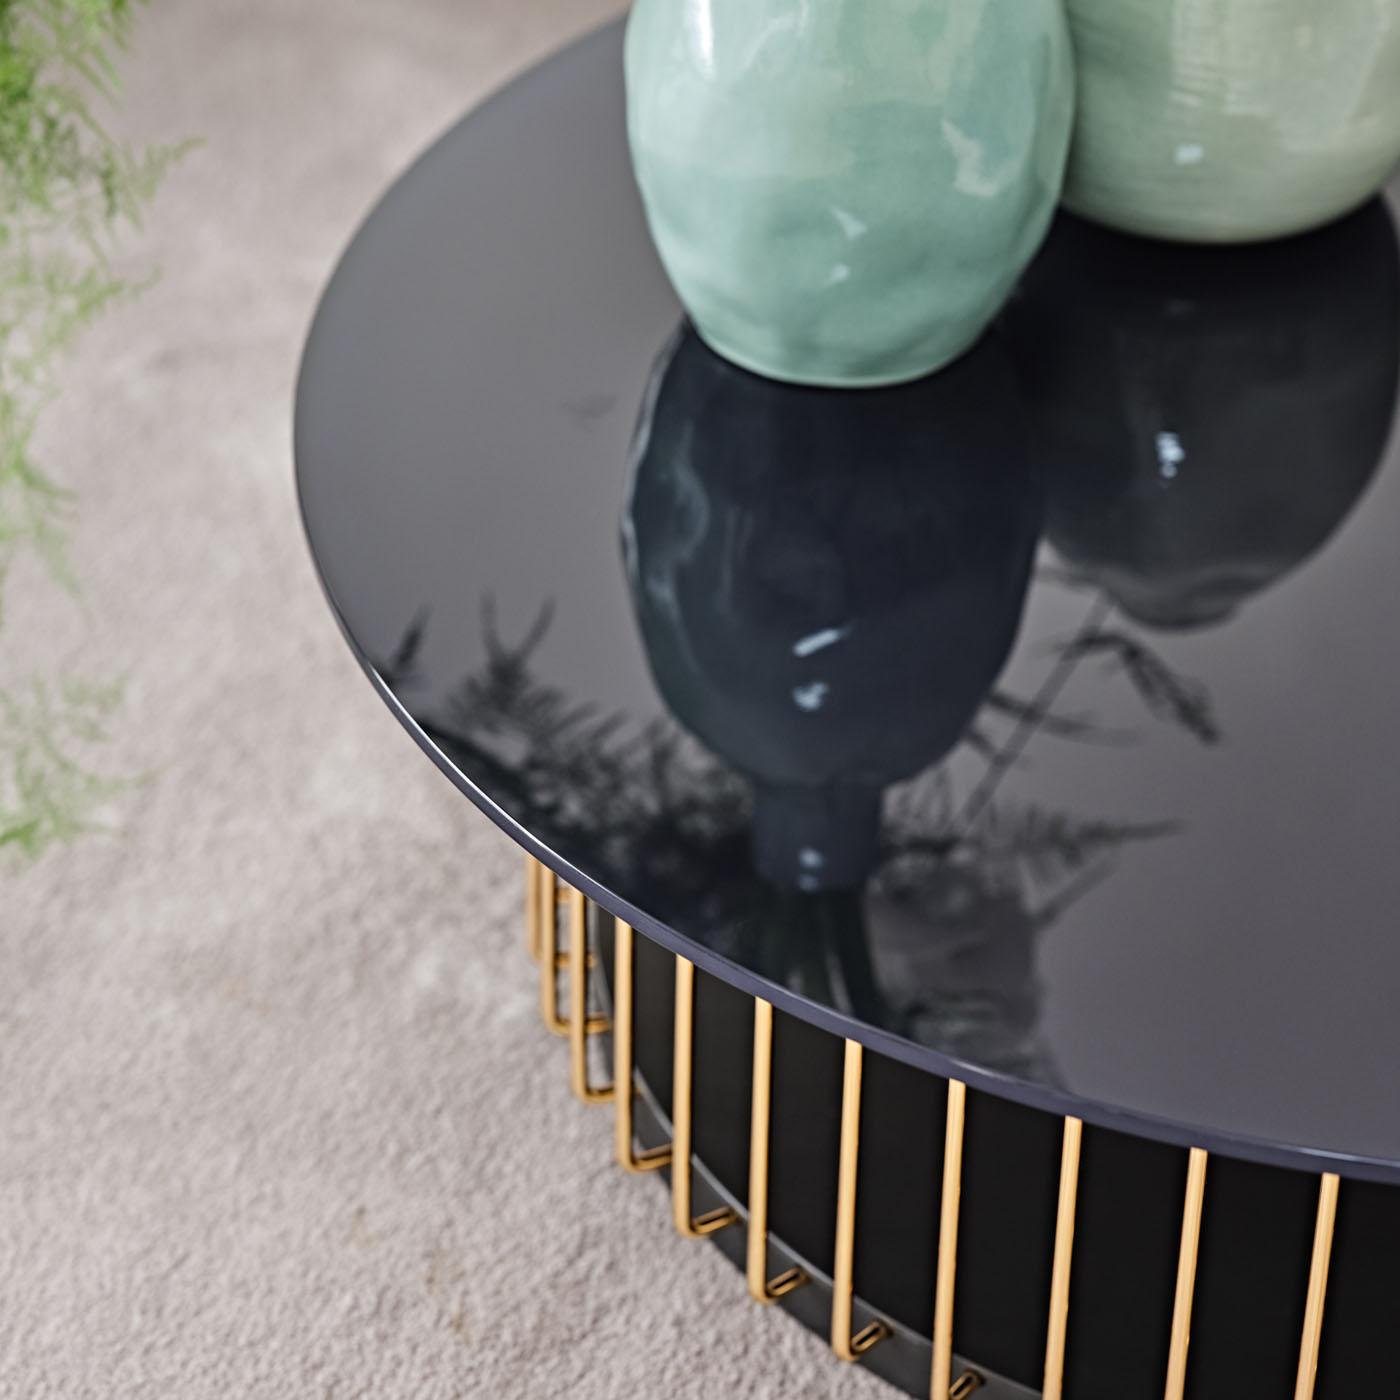 Refined and airy, this round coffee table is sure to infuse modern living sets with true elegance. Gleaming metal bars finished in glossy gold connect the round-cut matte-black MDF base to the circular glass top, which sports a sophisticated blue